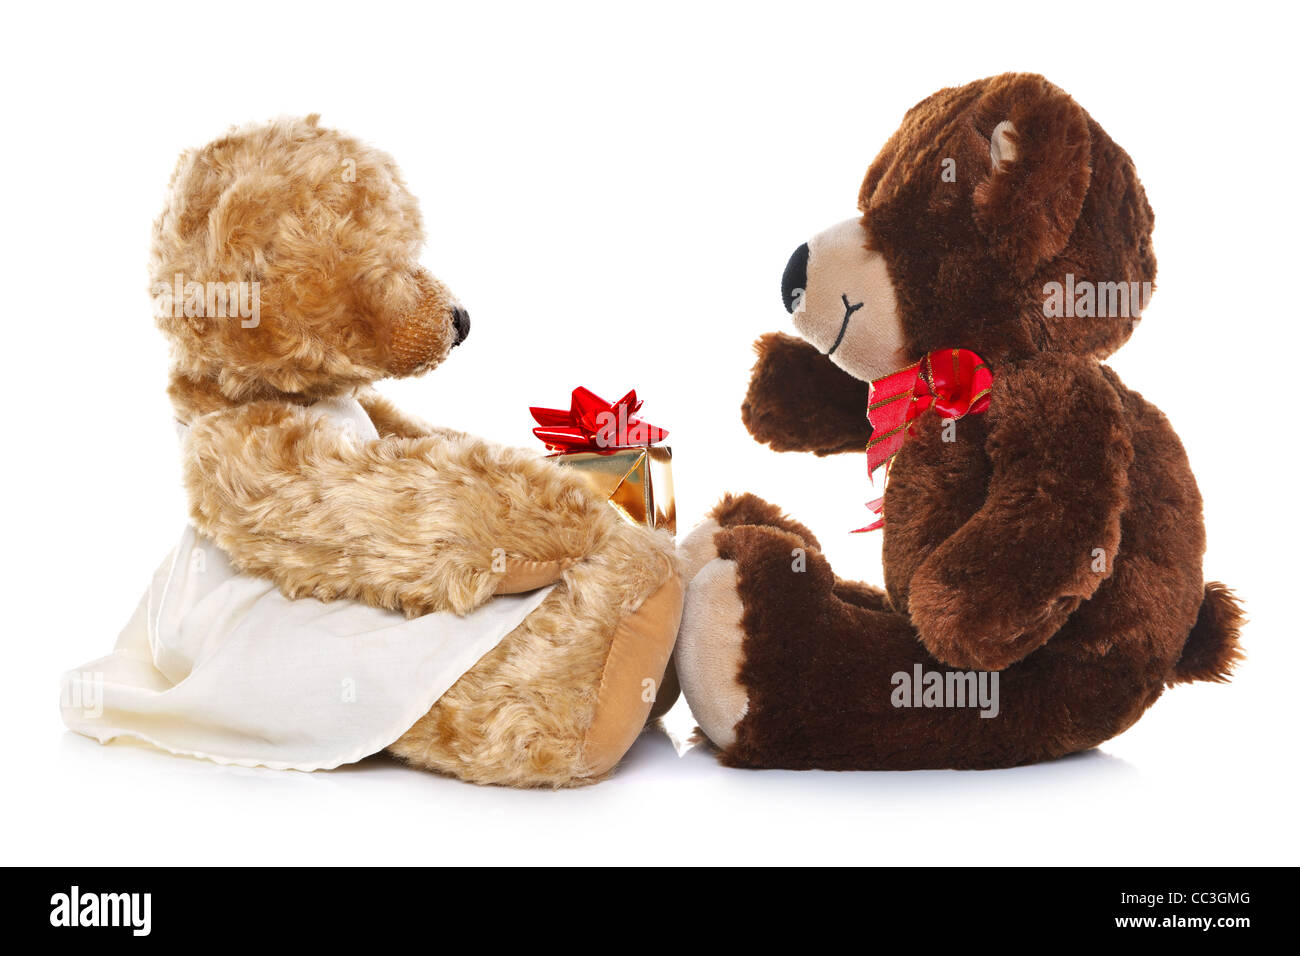 Photo of a boy teddy bear giving a girl teddy a gift, isolated on a white background. Stock Photo